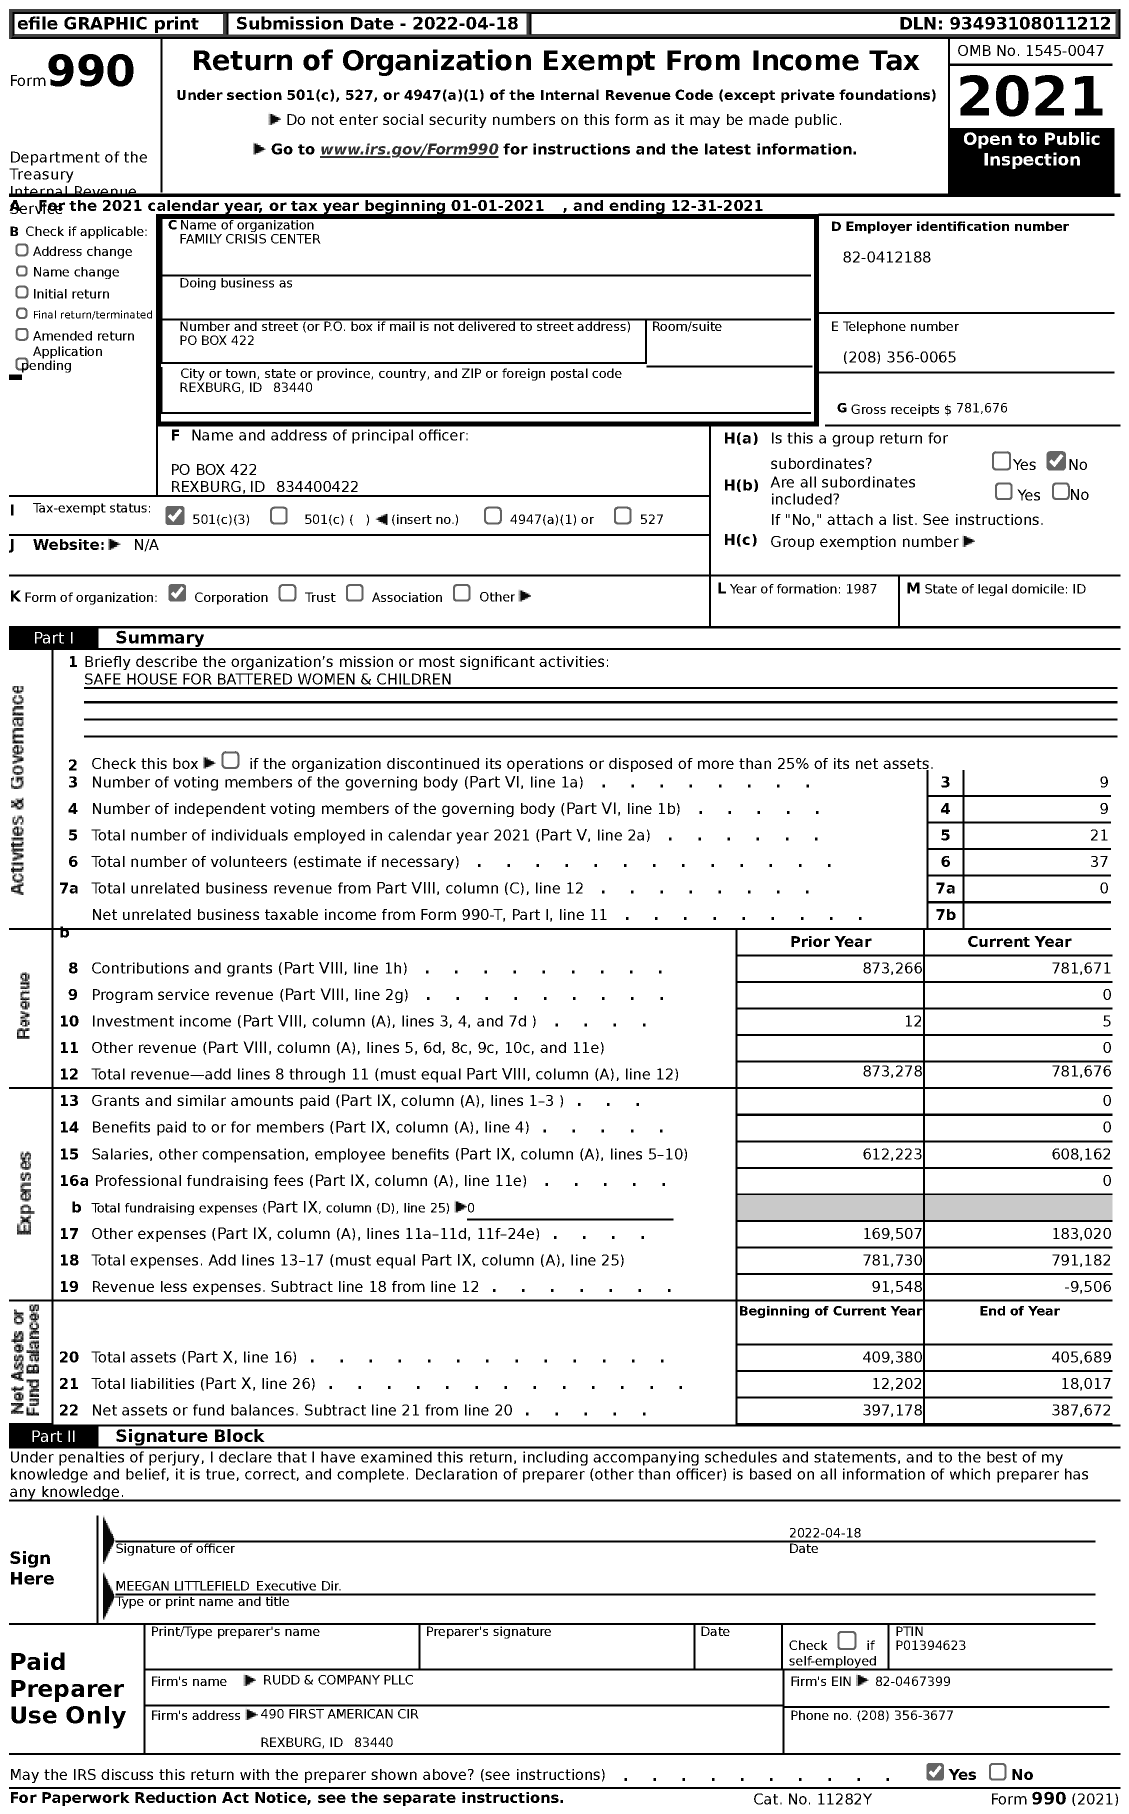 Image of first page of 2021 Form 990 for Family Crisis Center